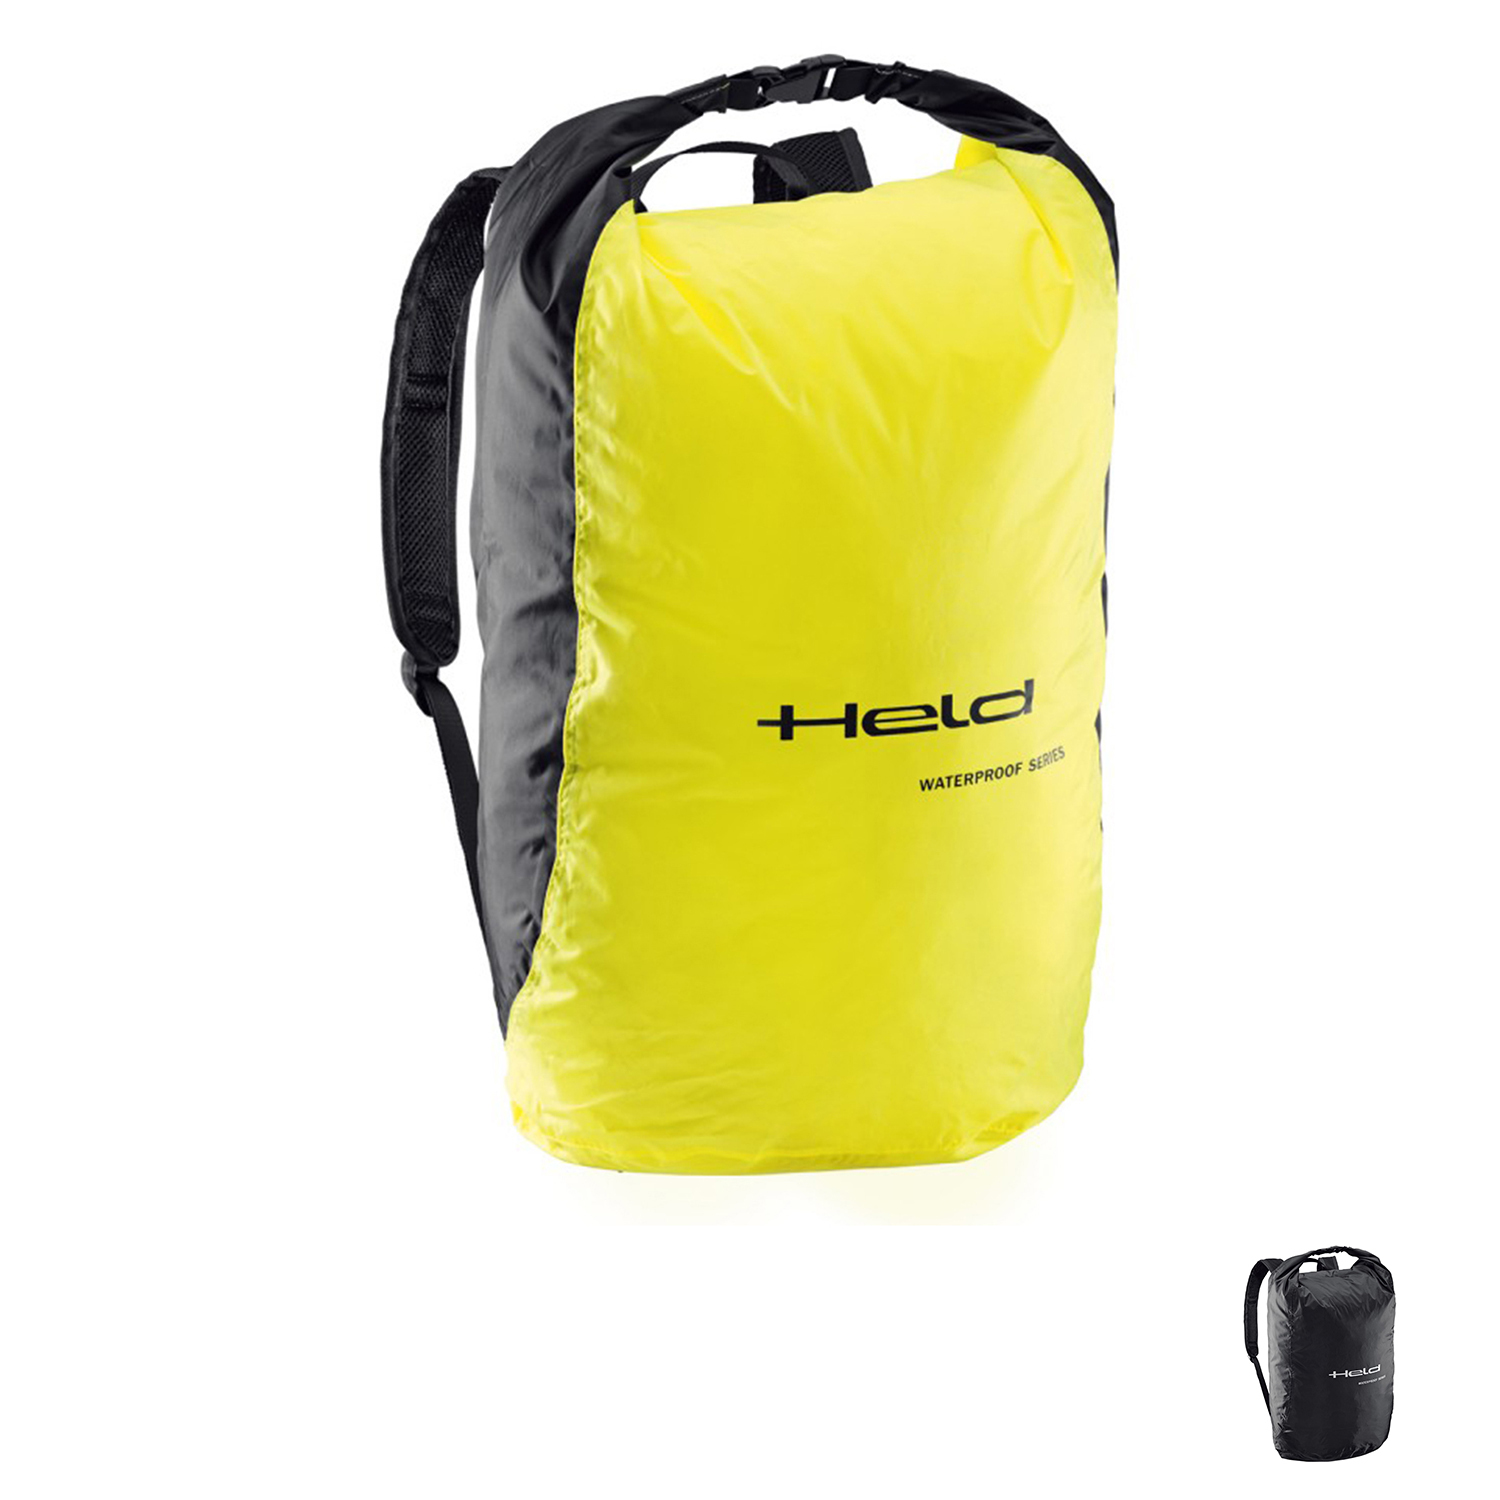 Held Rain Pouch Backpack - Available in Various Colours and Sizes